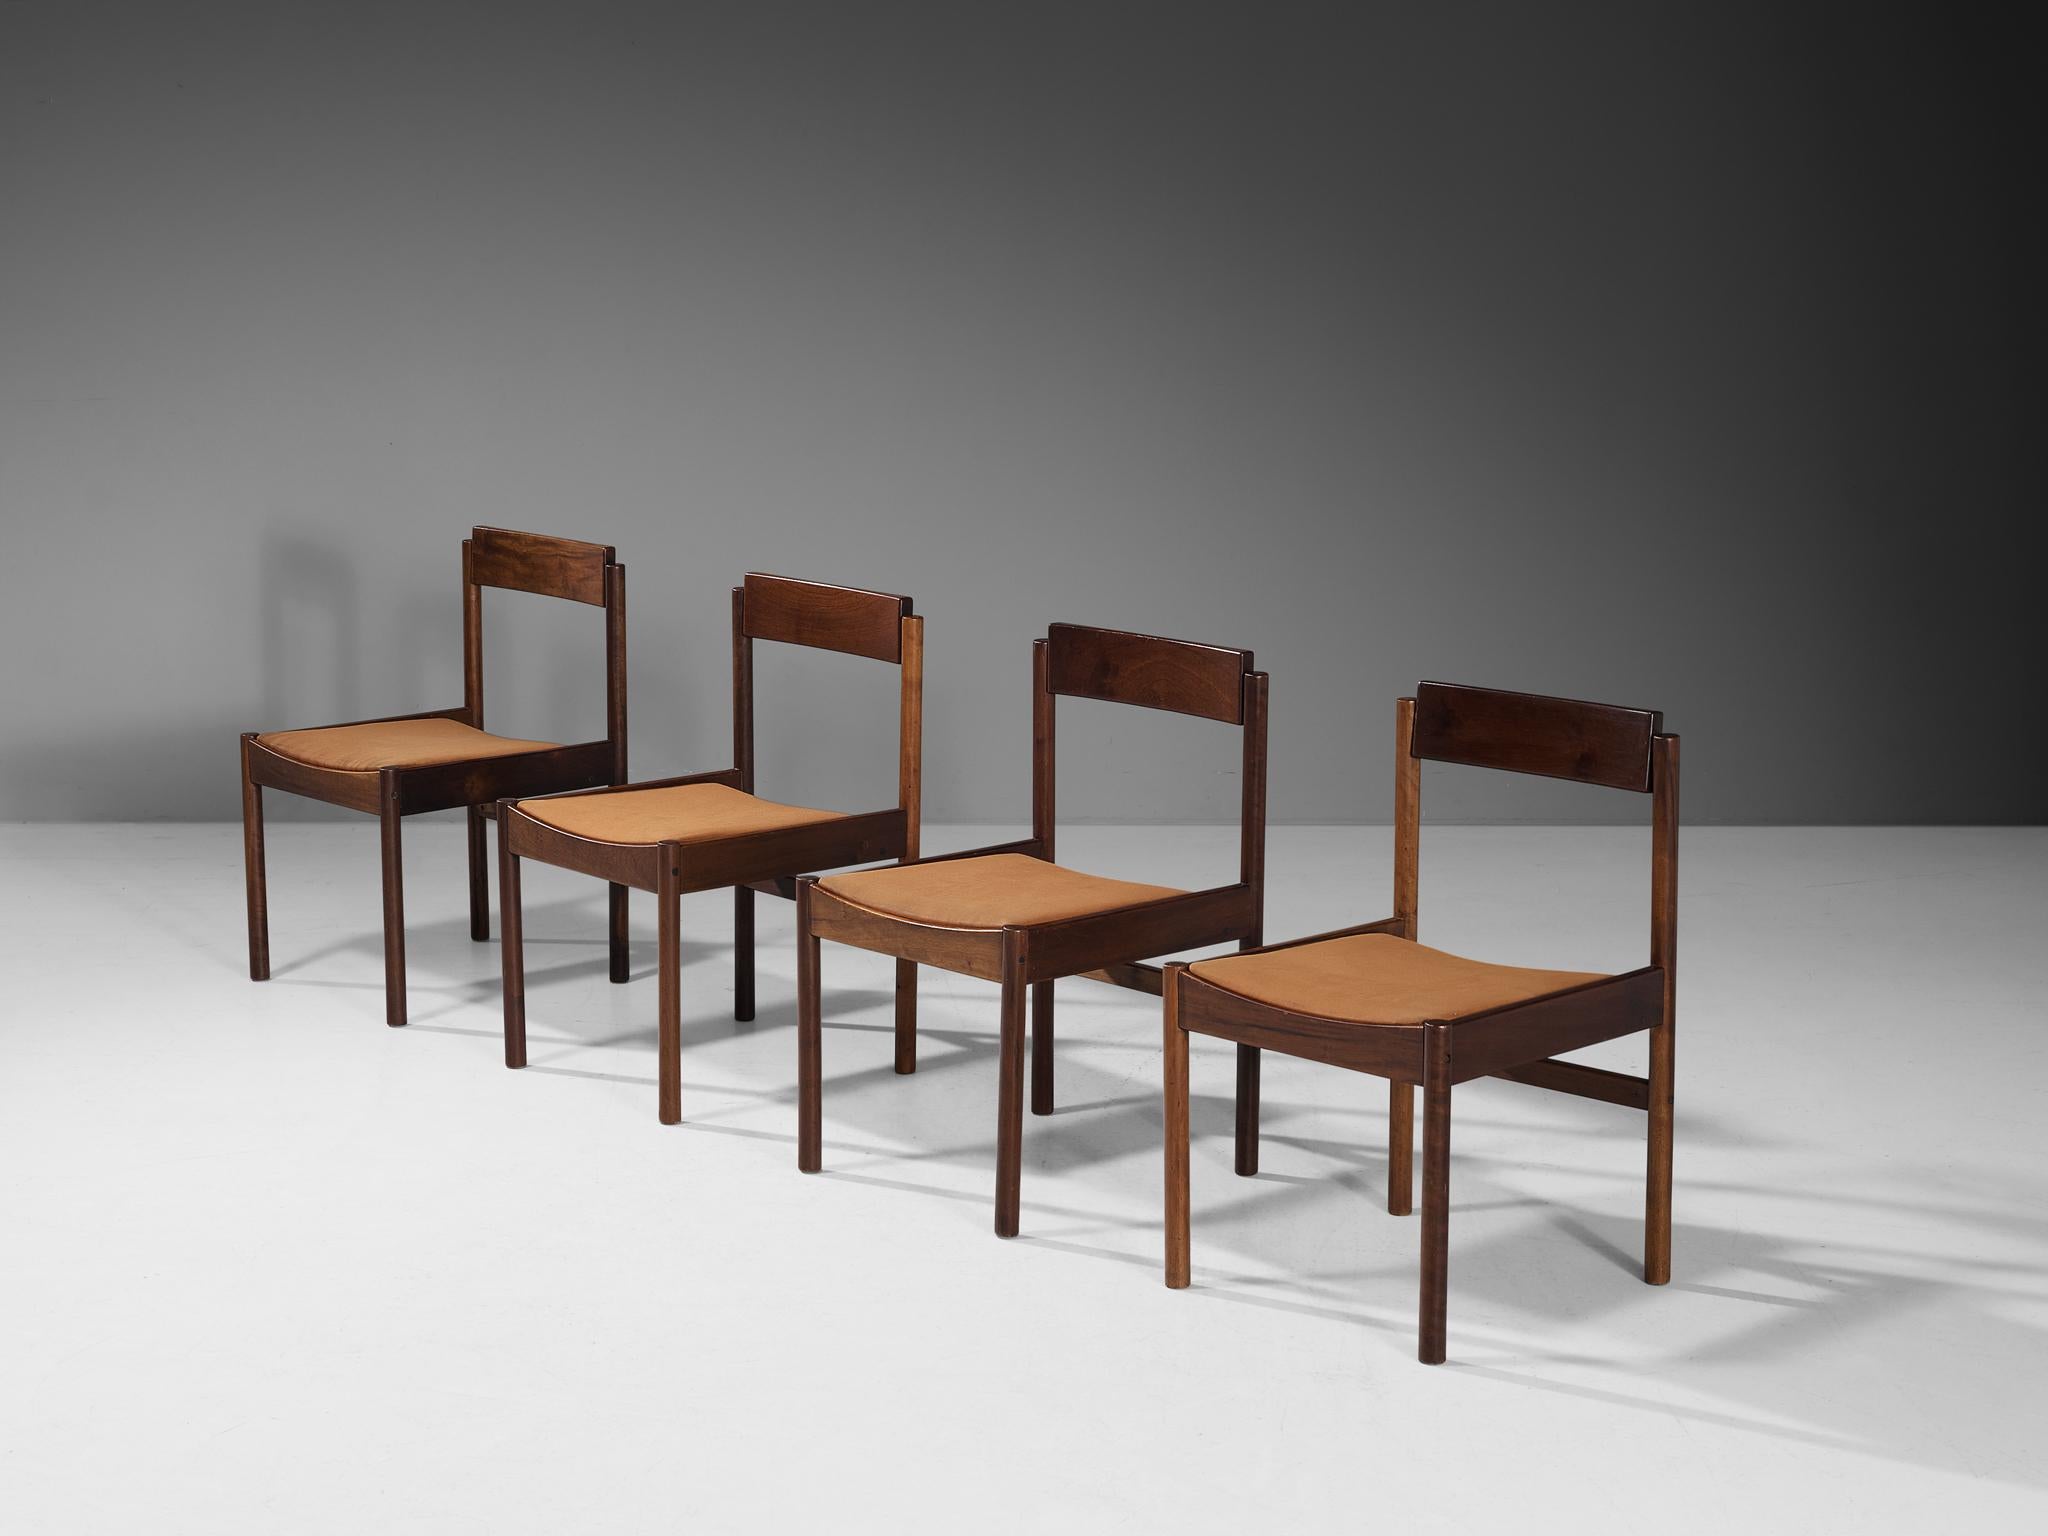 Set of four dining chairs, walnut, fabric, Europe, 1960s.

This design has a strong and sincere appearance constructed due to the subtle and minimalist wooden frame. The rotatable backrest proofs the great eye for detail and high-level of